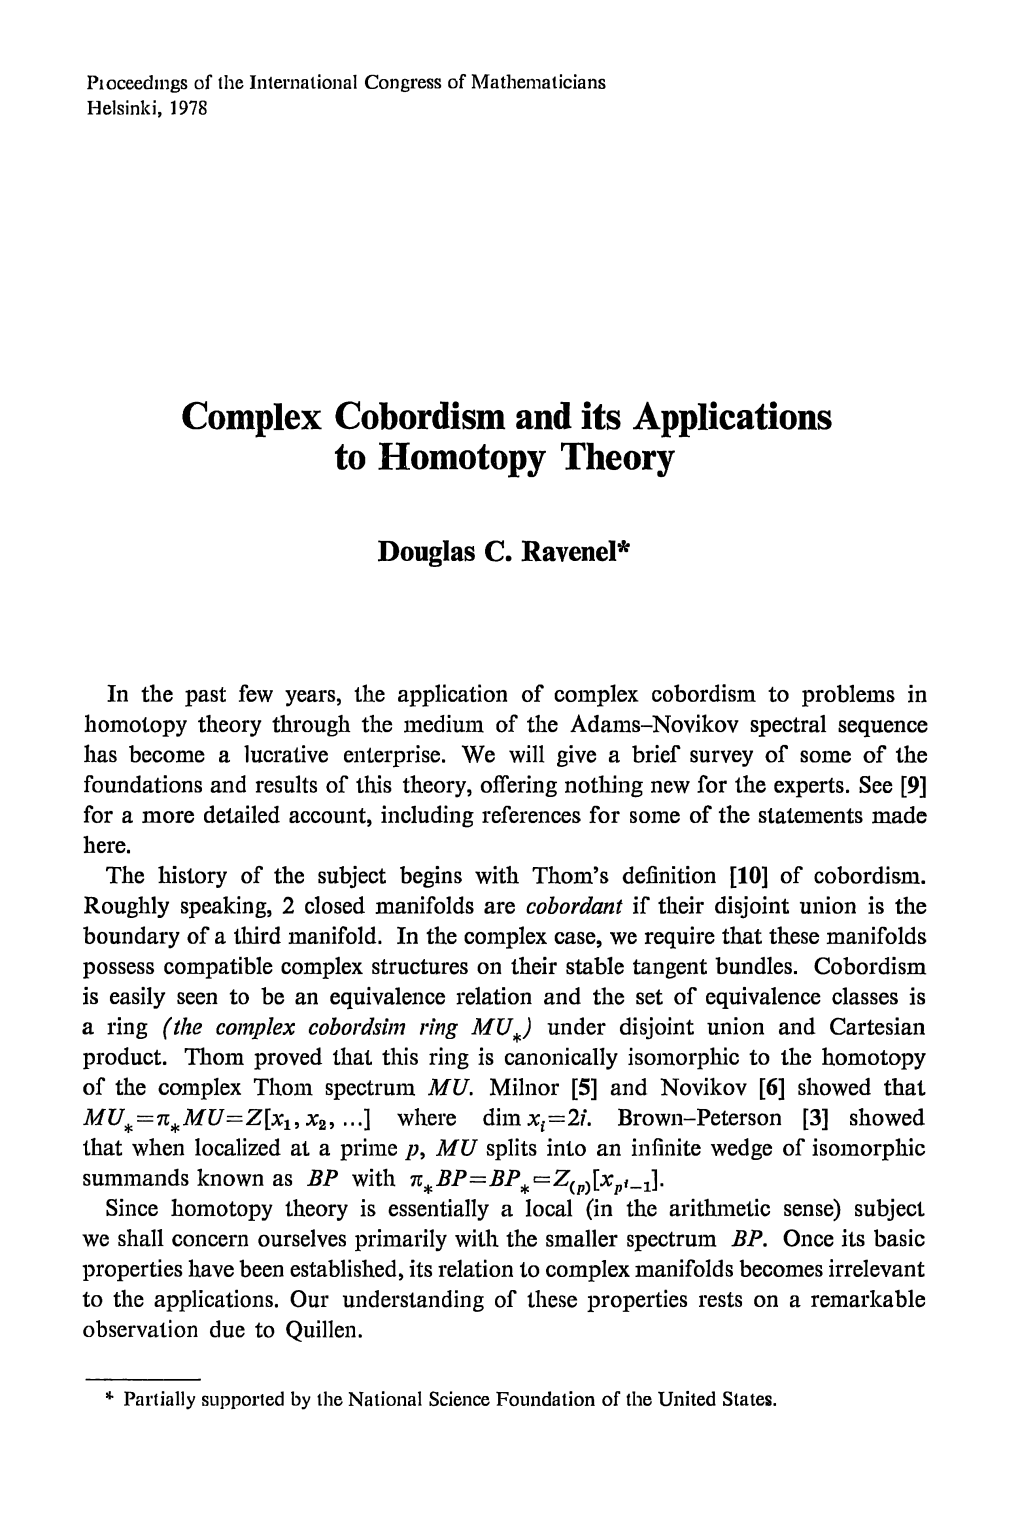 Complex Cobordism and Its Applications to Homotopy Theory